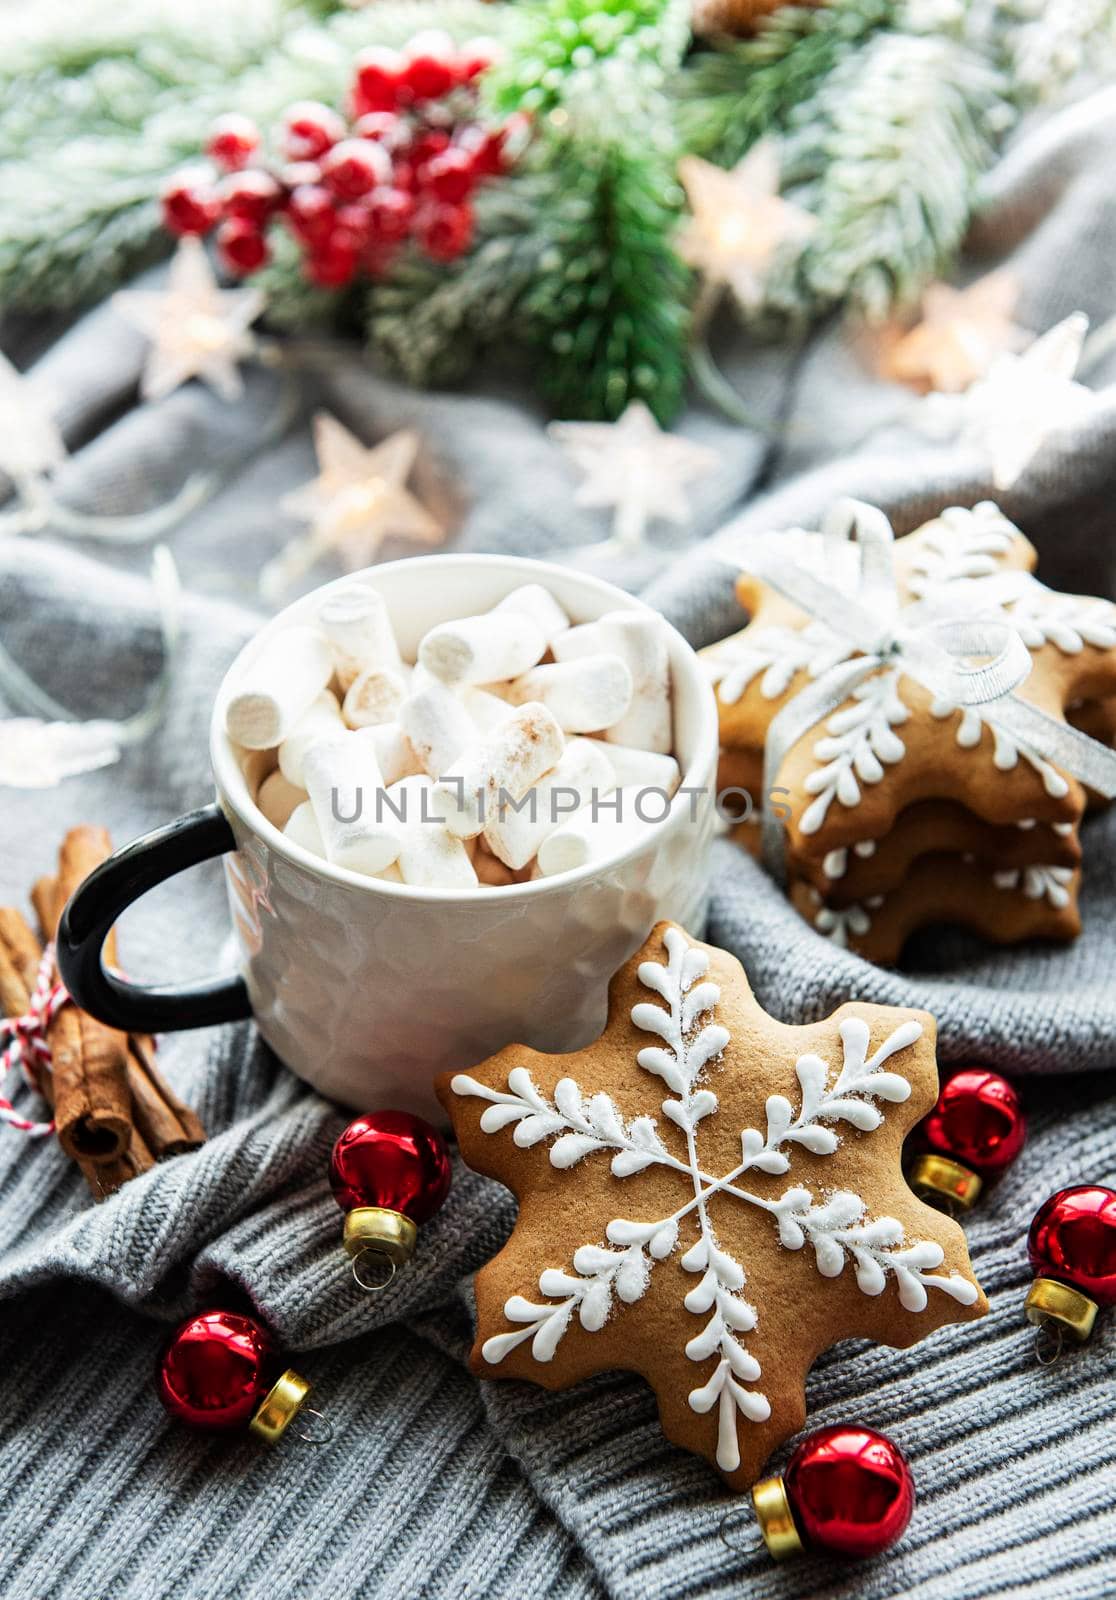 Christmas decorations, cocoa and gingerbread cookies. White wooden background.